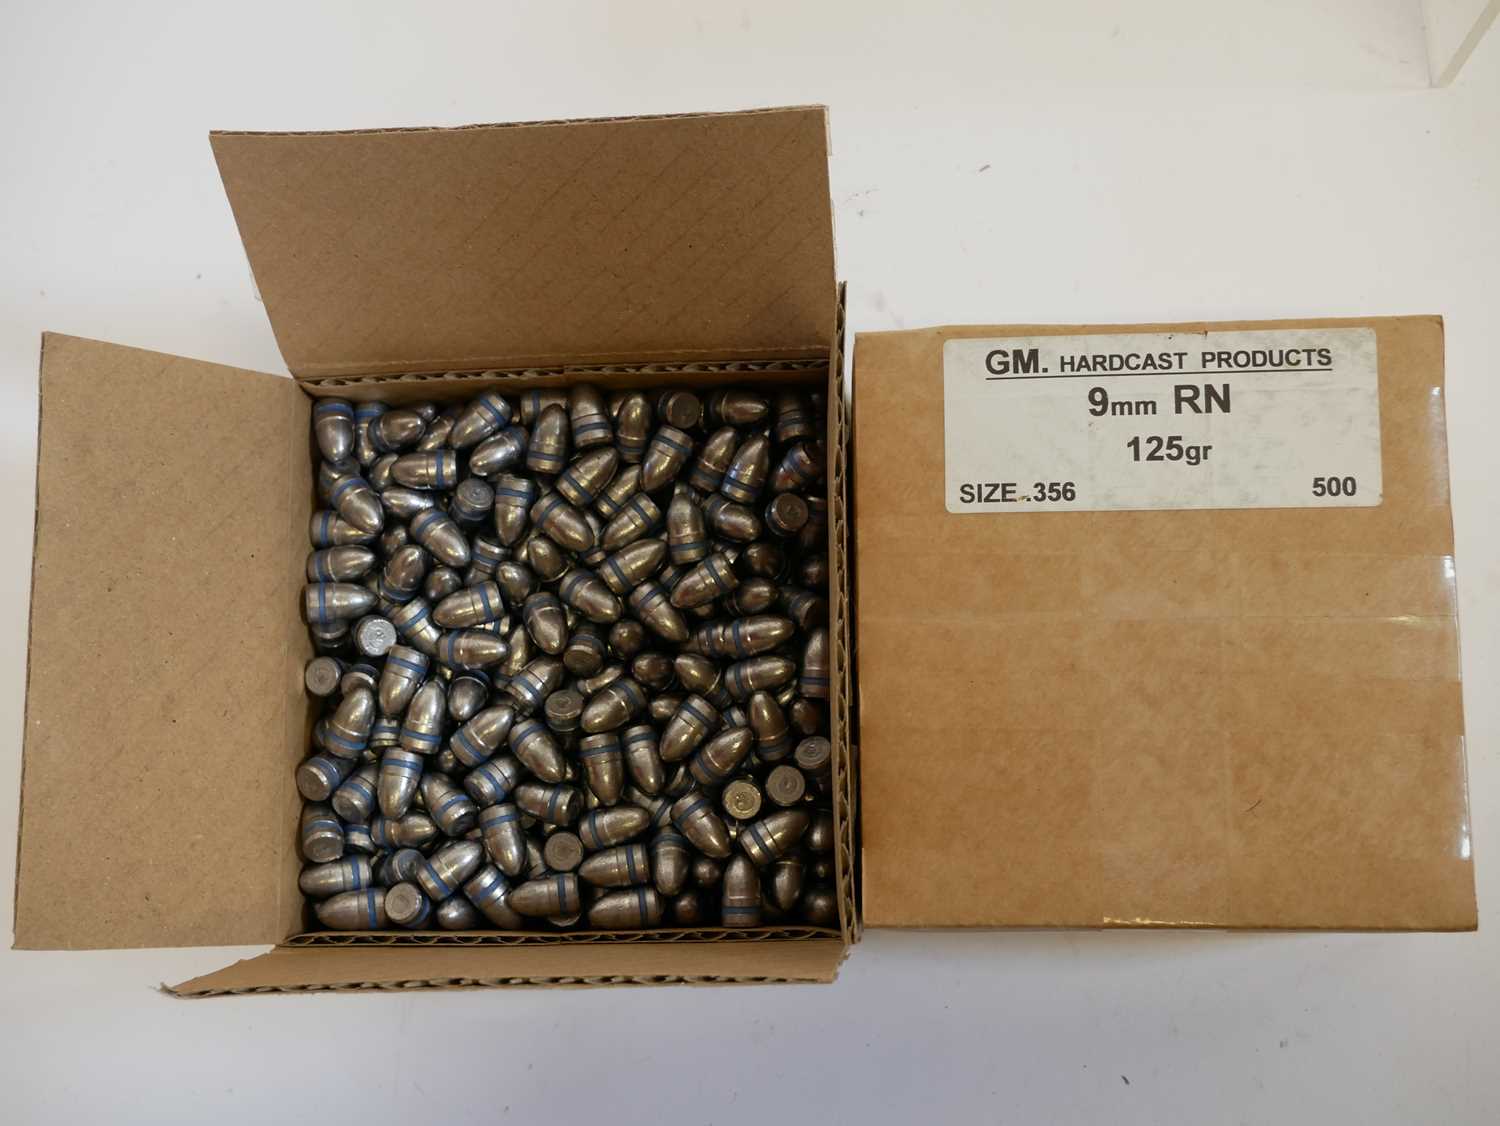 9mm GM Hard Cast bullets 125 grain size .356, approximately 1,000. - Image 2 of 2